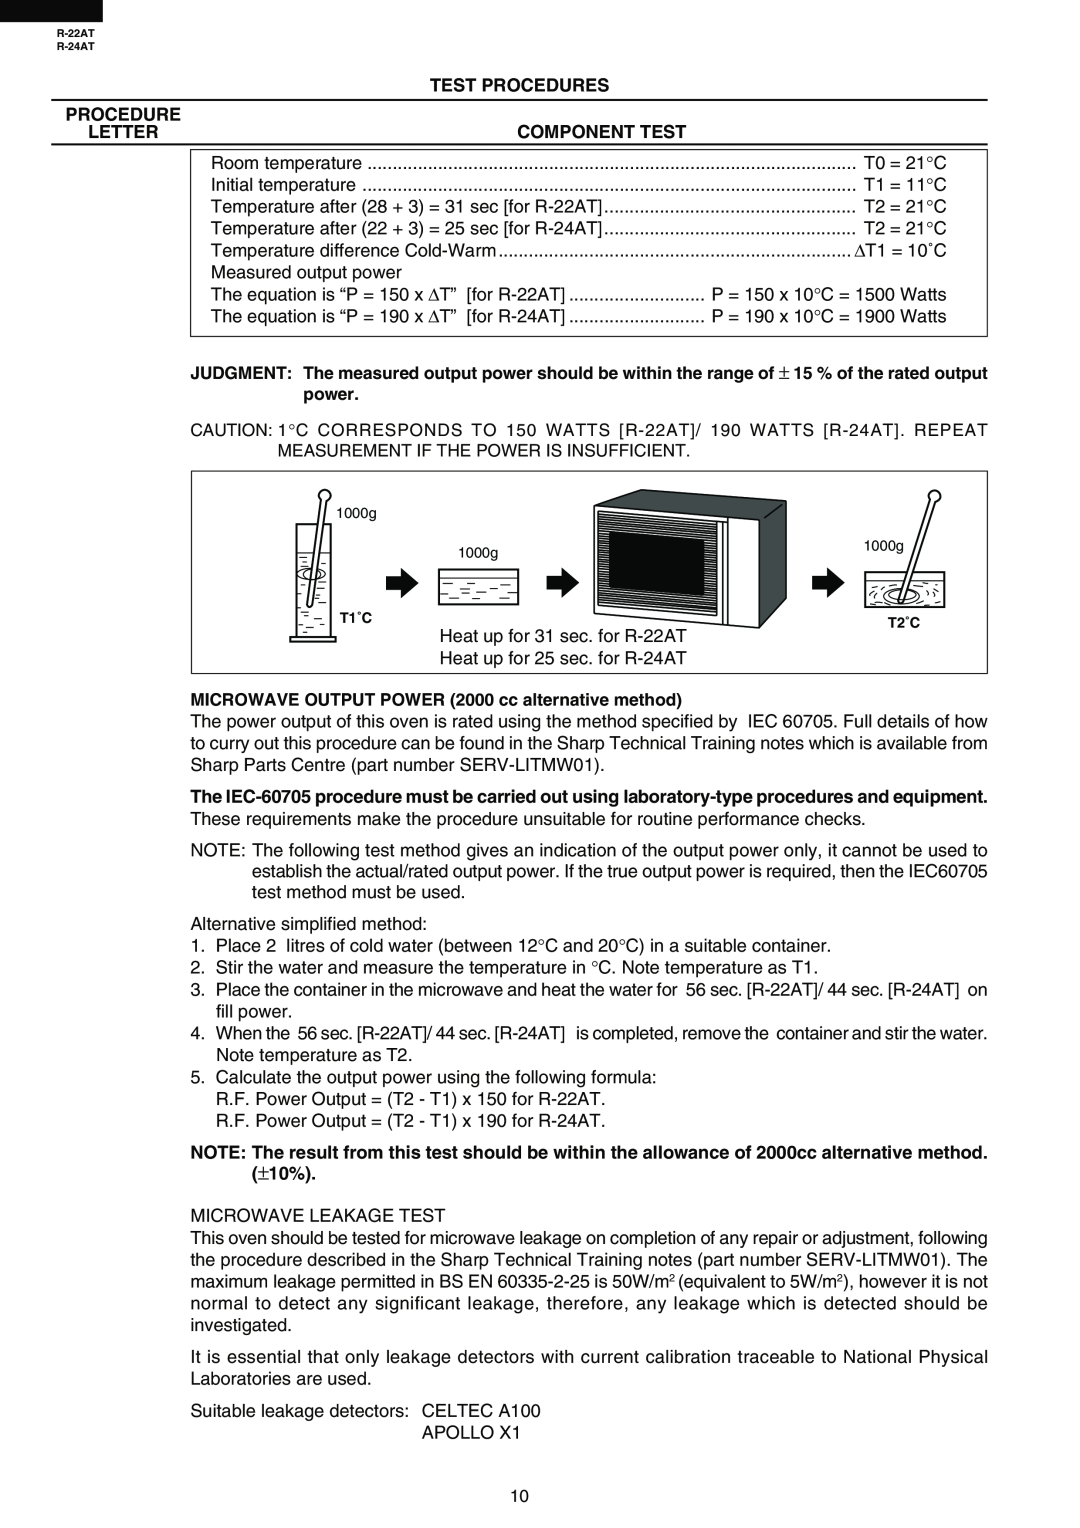 Sharp R-24AT, R-22AT power, MICROWAVE OUTPUT POWER 2000 cc alternative method, Test Procedures, Letter, Component Test 